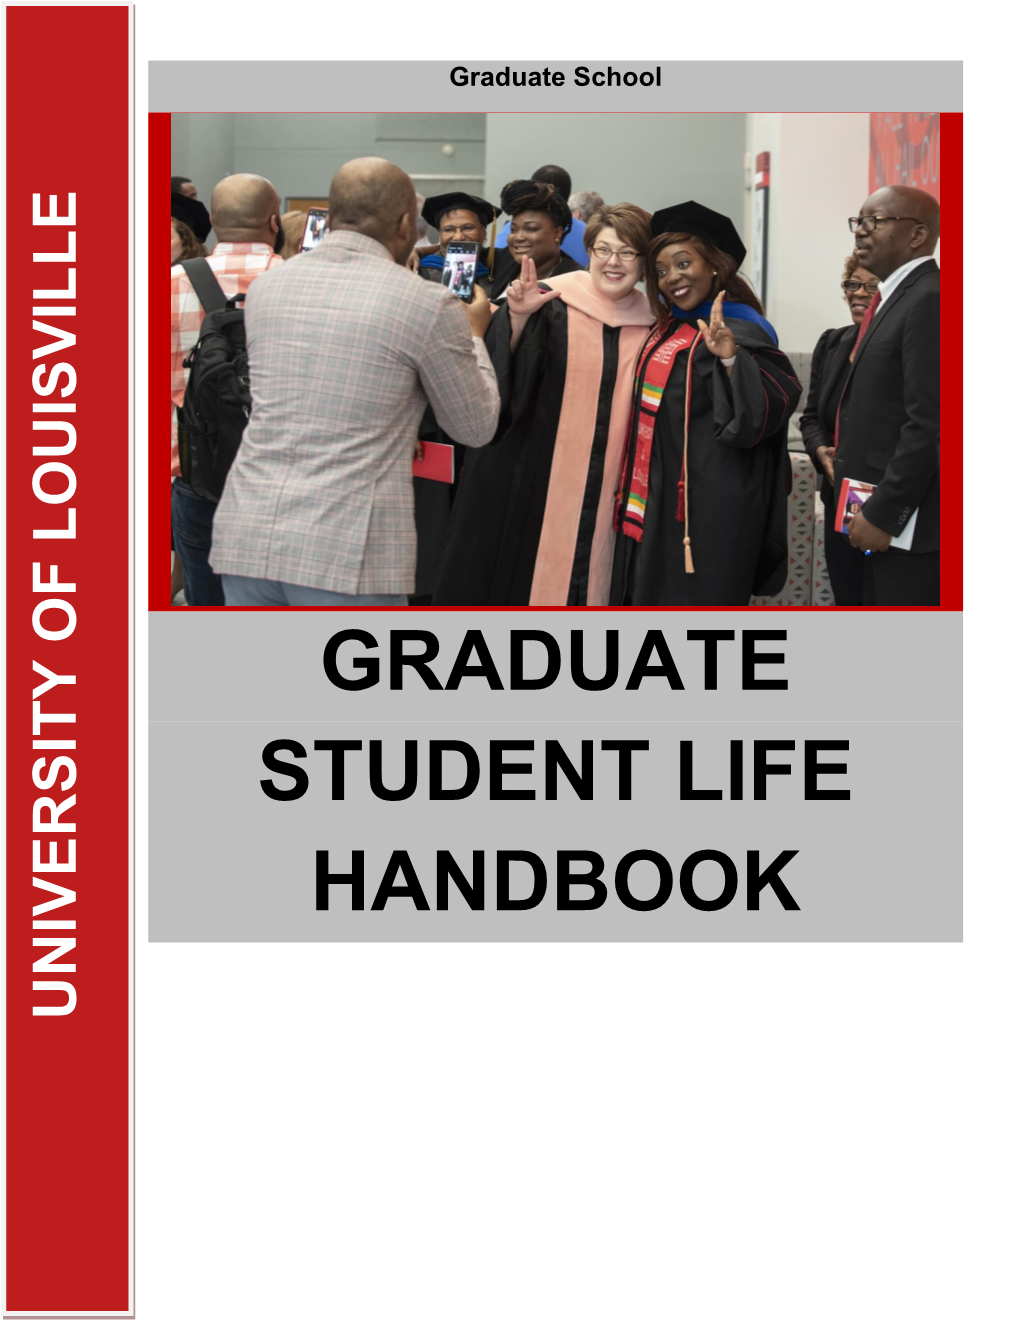 Graduate Student Life Handbook Was Created by Cara Mchugh, a Graduate Student at the University of Louisville and a Non-Louisville Native